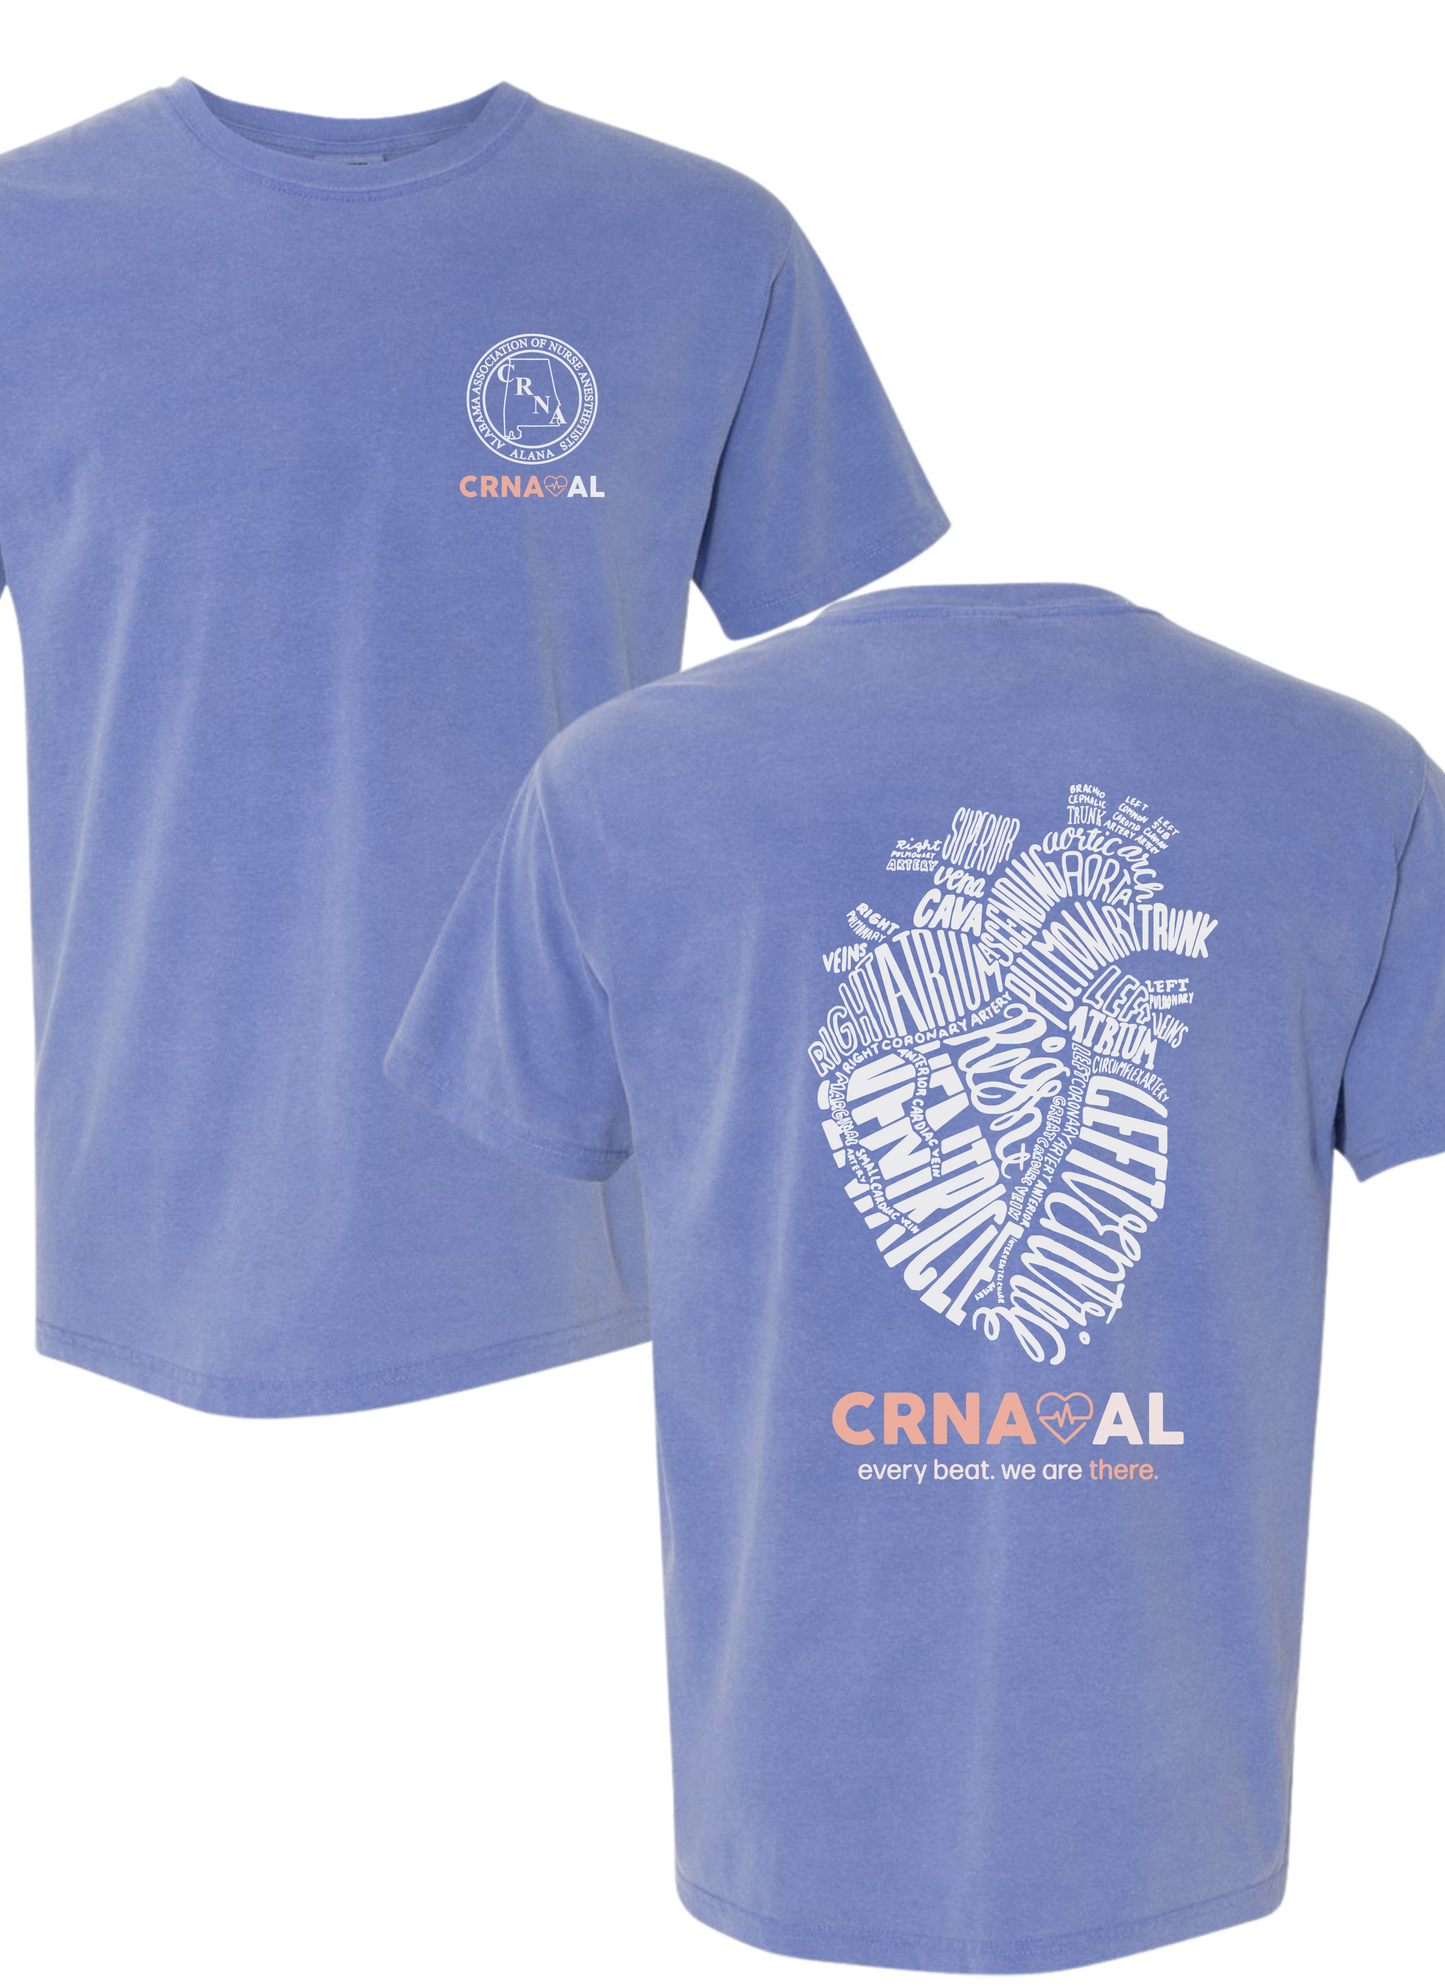 CRNA Comfort Colors Spring Shirts: Periwinkle